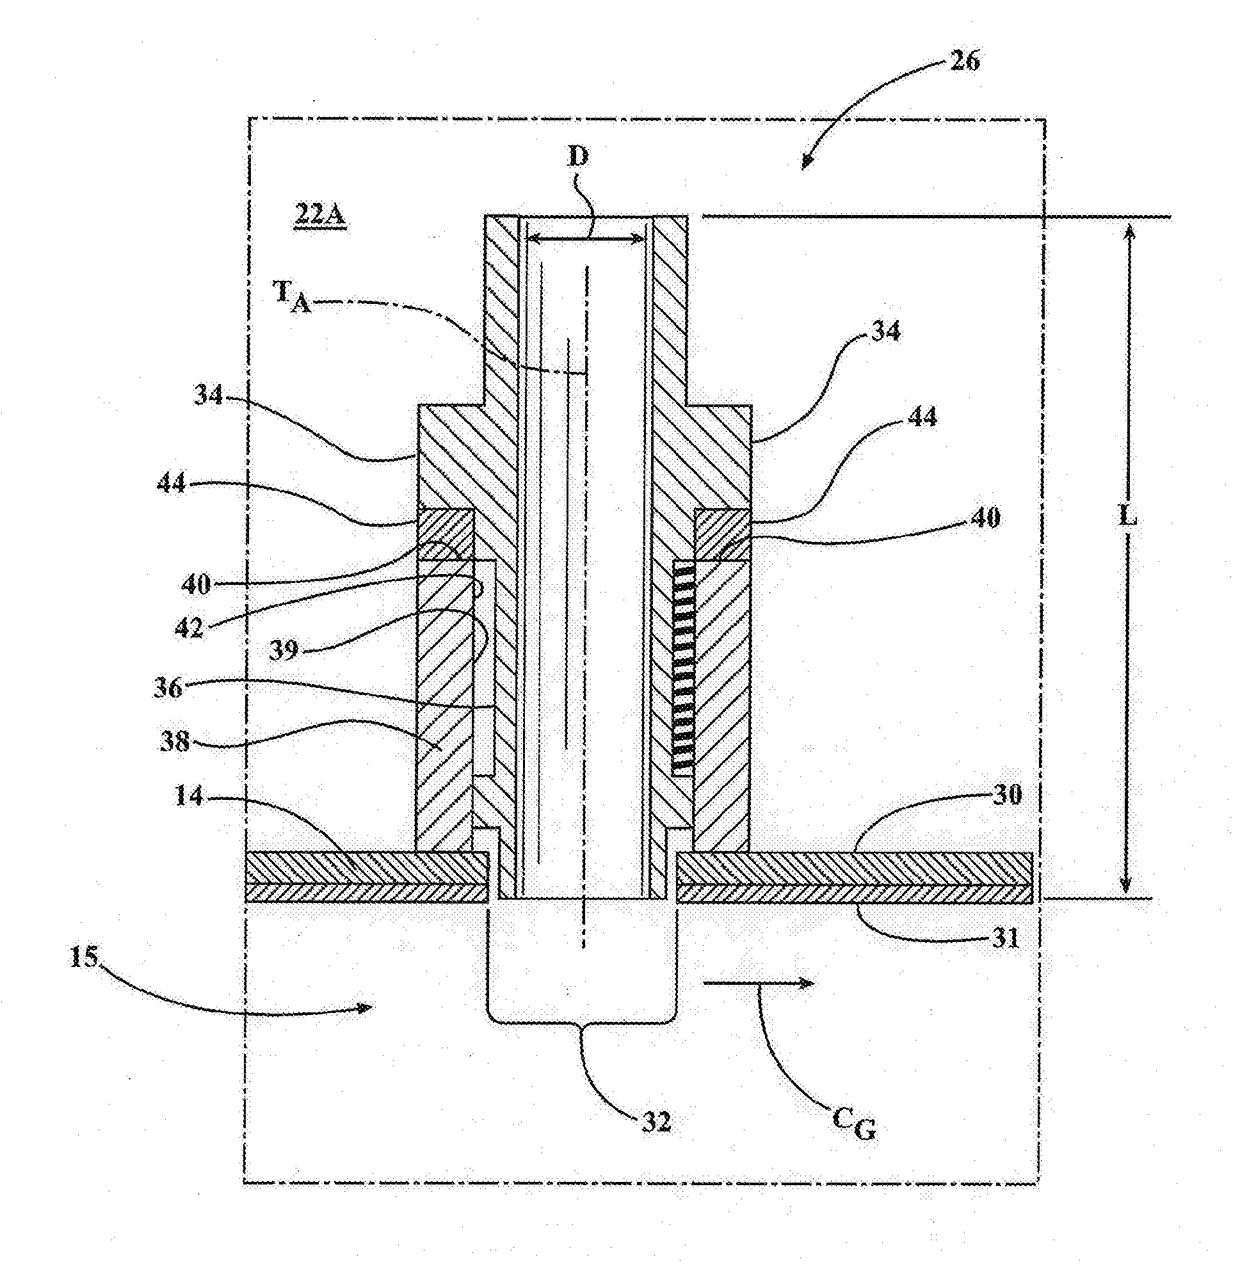 Resonators with interchangeable metering tubes for gas turbine engines